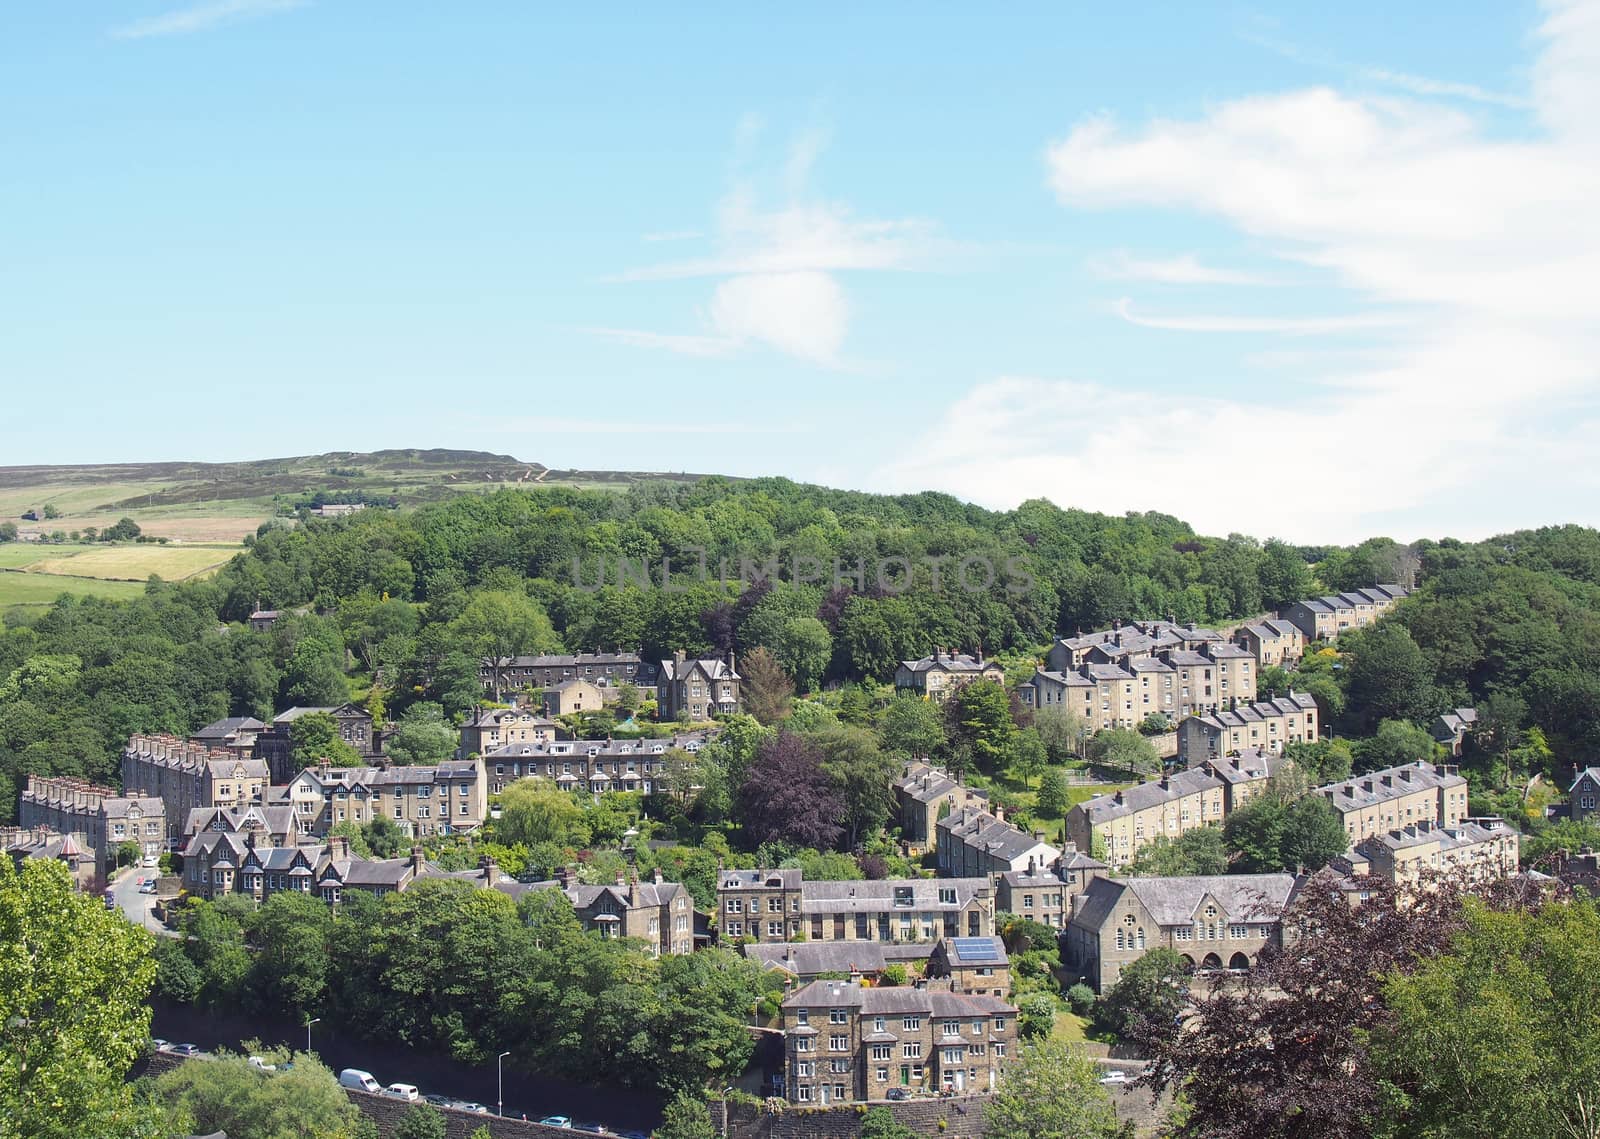 a scenic aerial view of the town of hebden bridge in west yorkshire with streets of stone houses and roads between trees and a blue summer cloudy sky